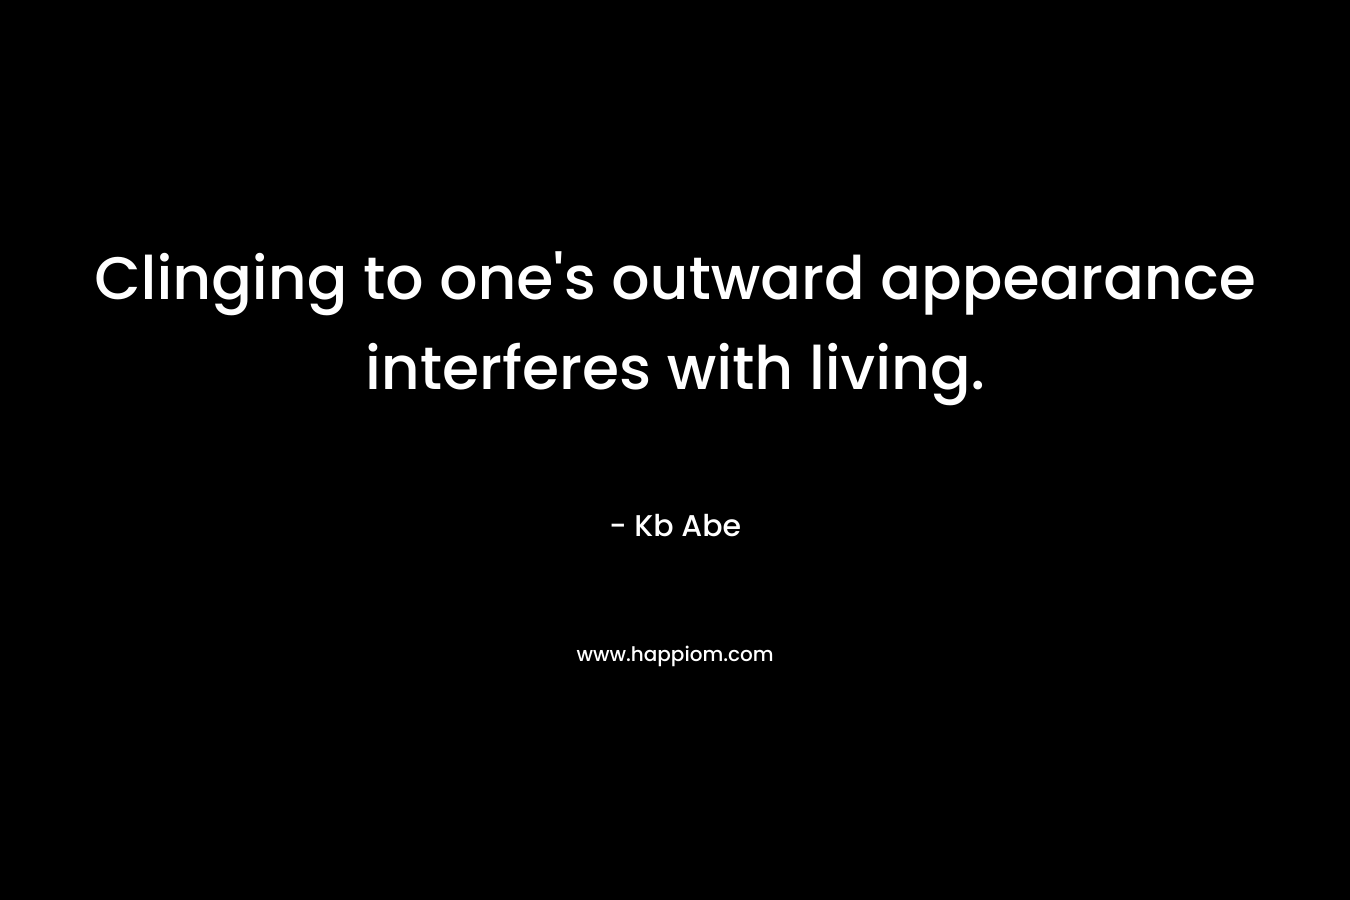 Clinging to one’s outward appearance interferes with living. – Kb Abe